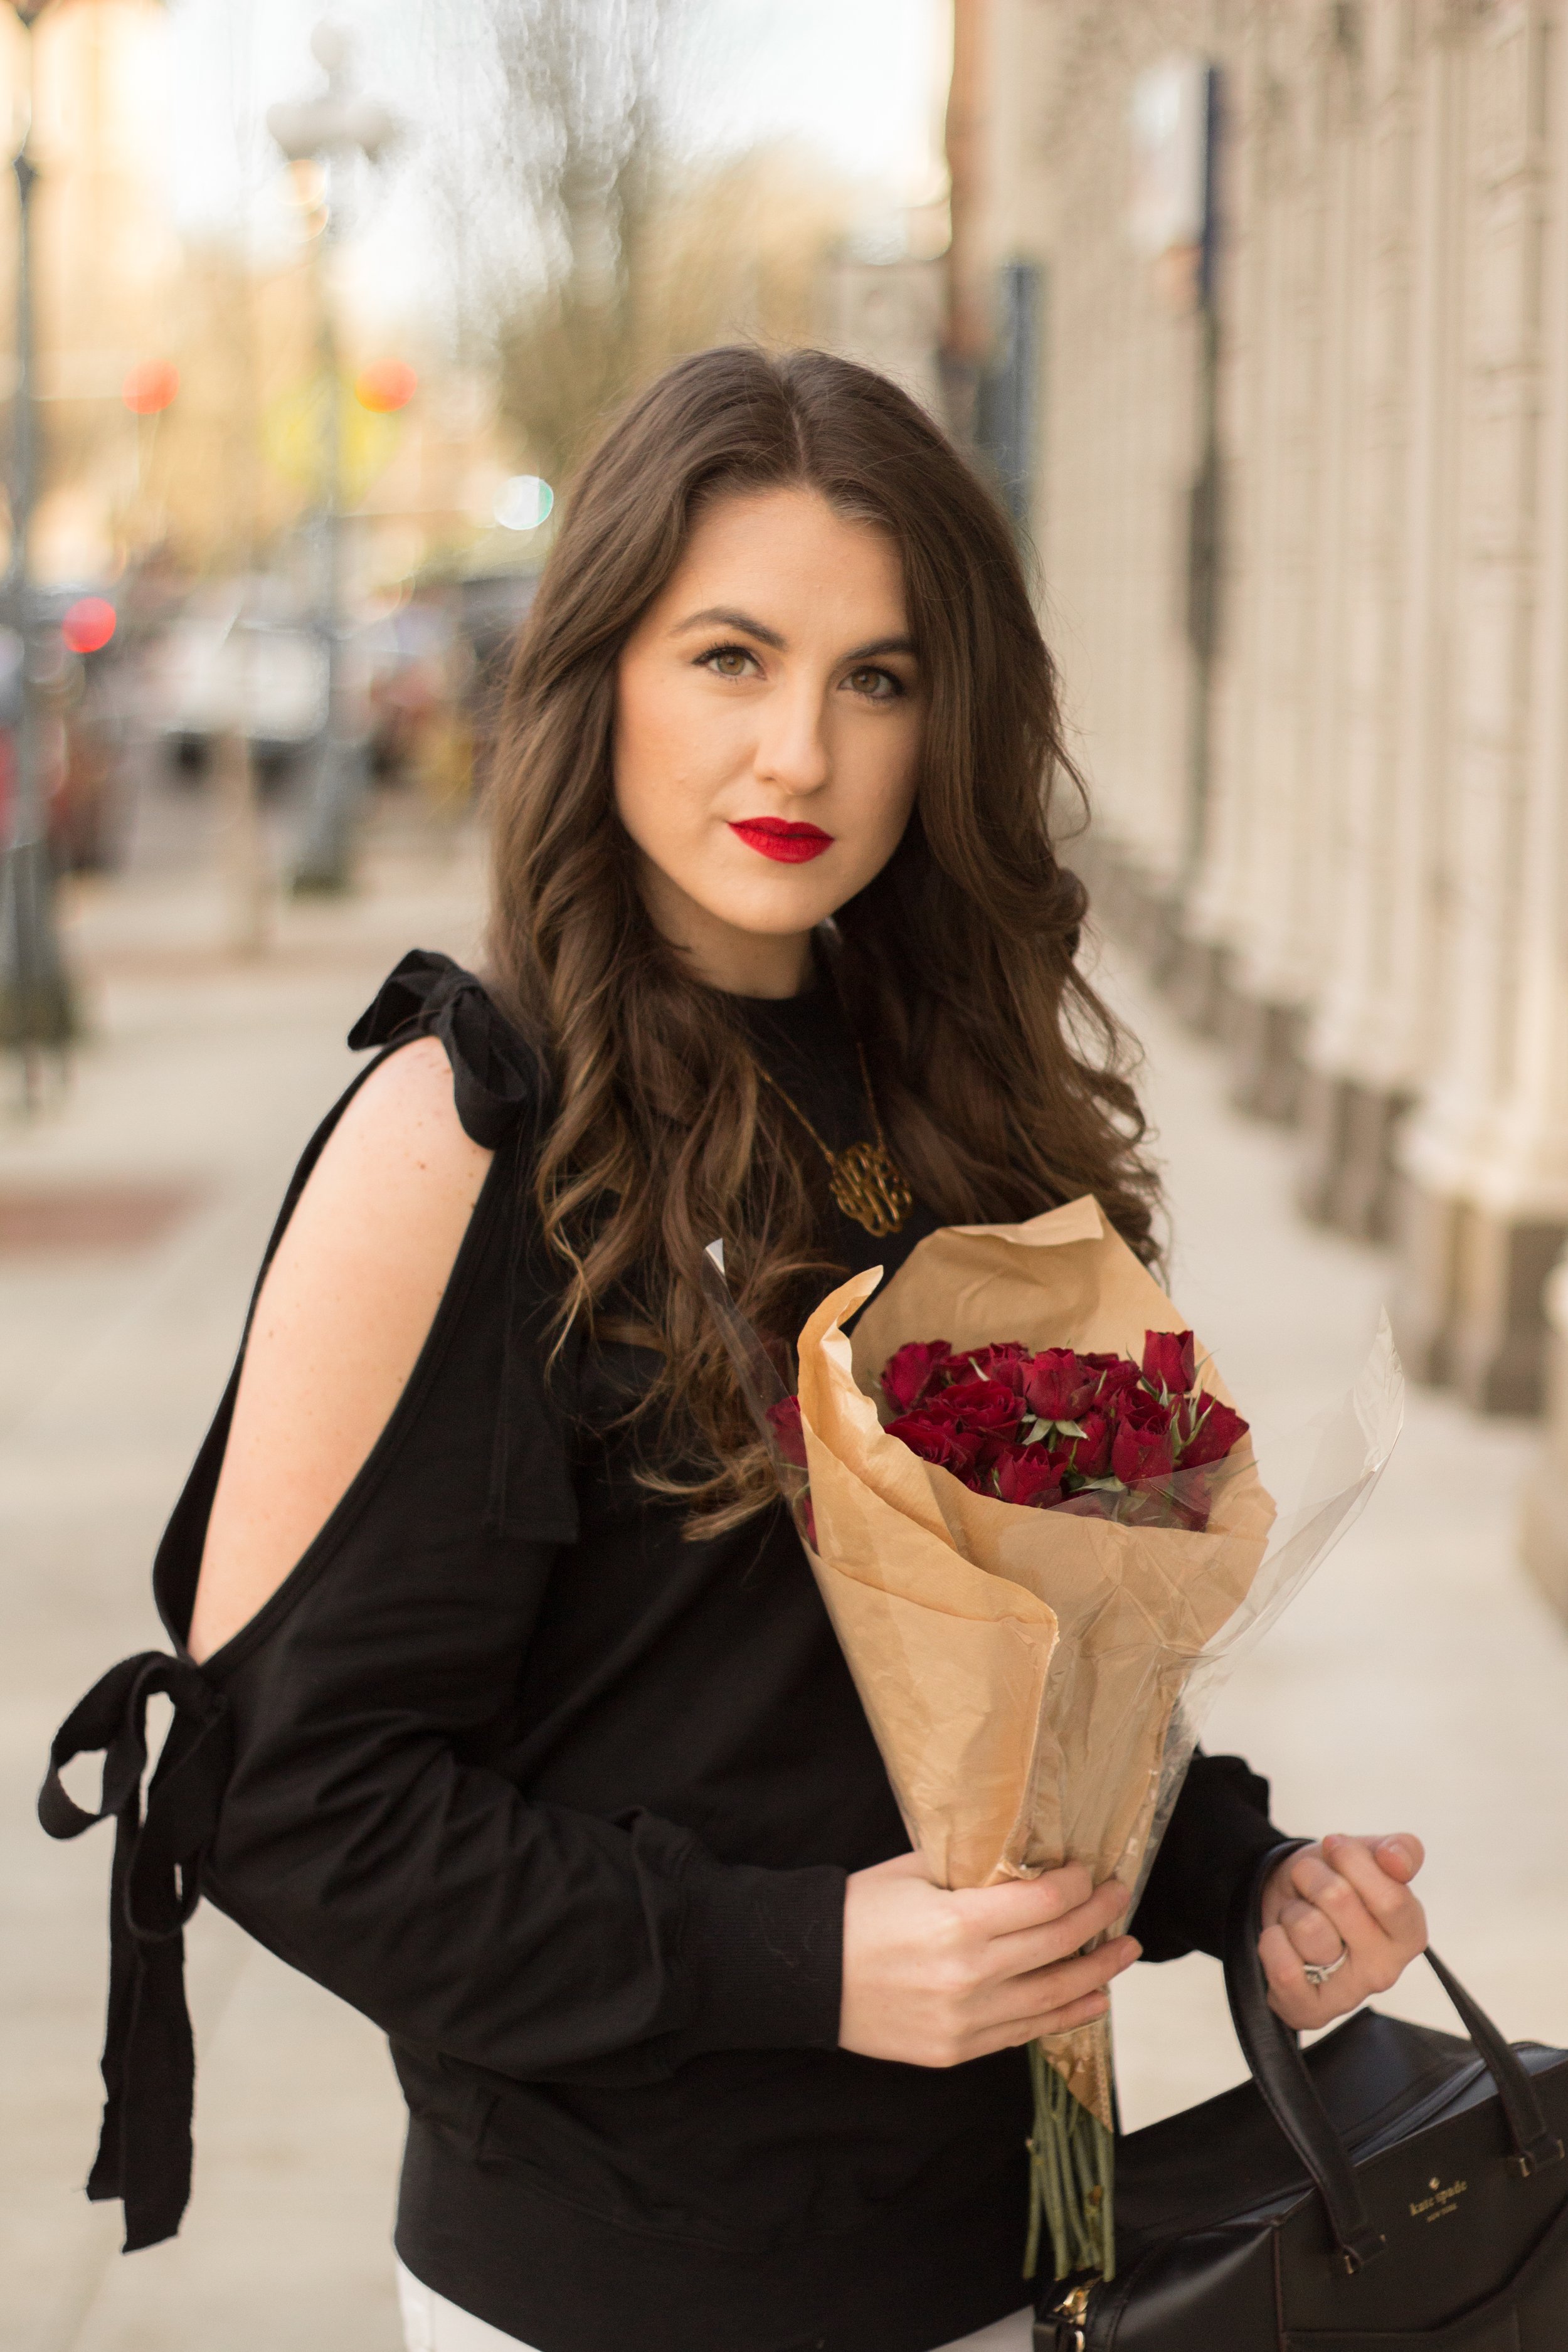 The perfect subtle Valentine's Day look with bows on your sleeves and red roses.